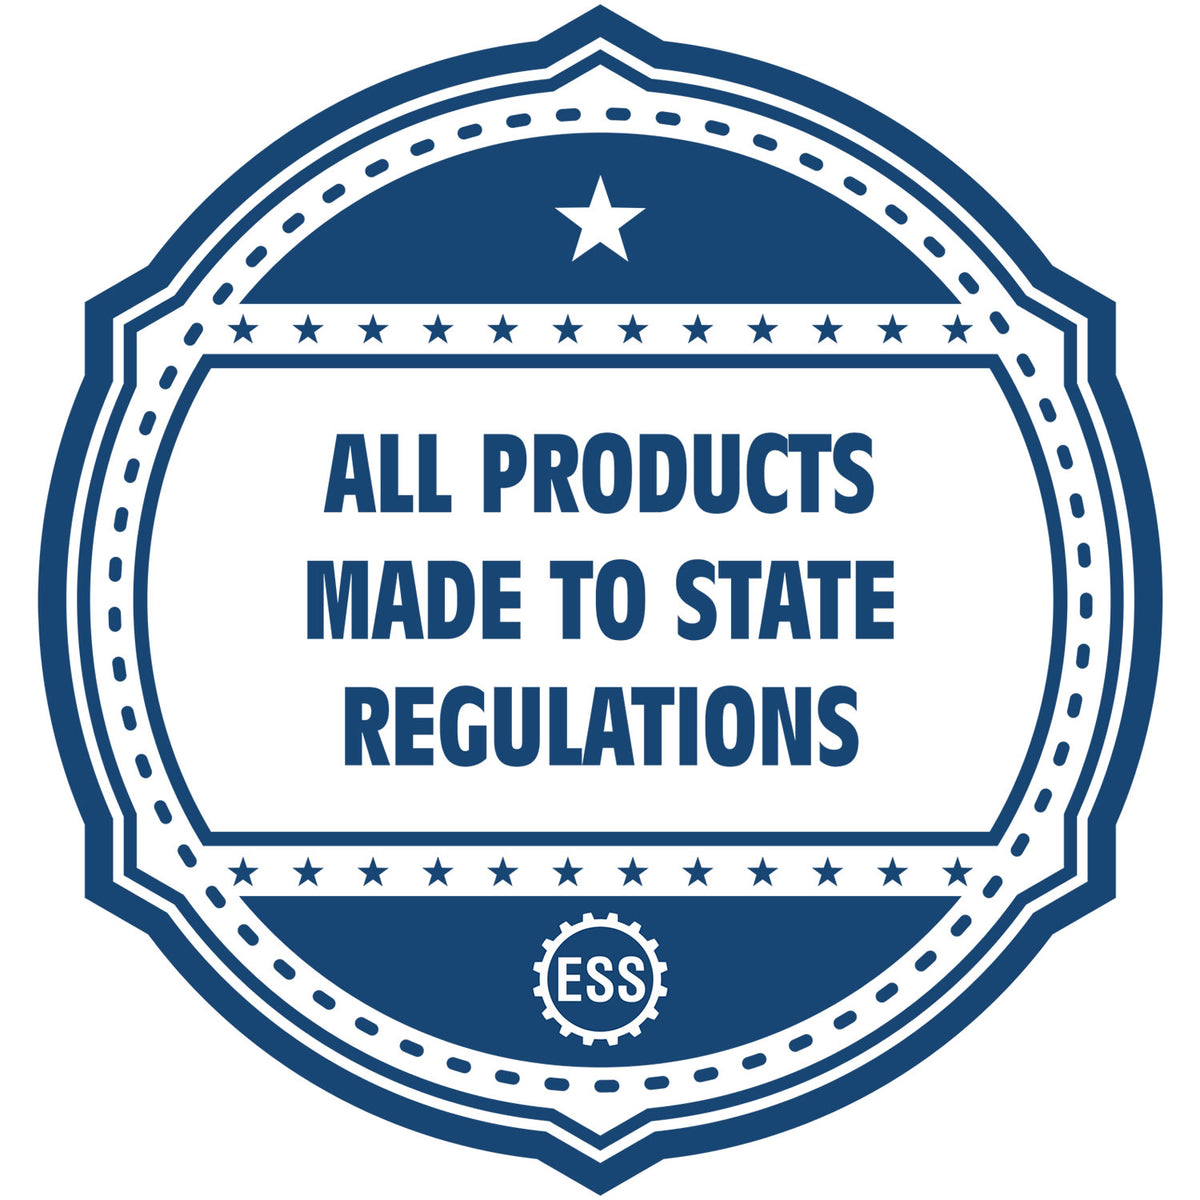 An icon or badge element for the Hawaii Professional Engineer Seal Stamp showing that this product is made in compliance with state regulations.